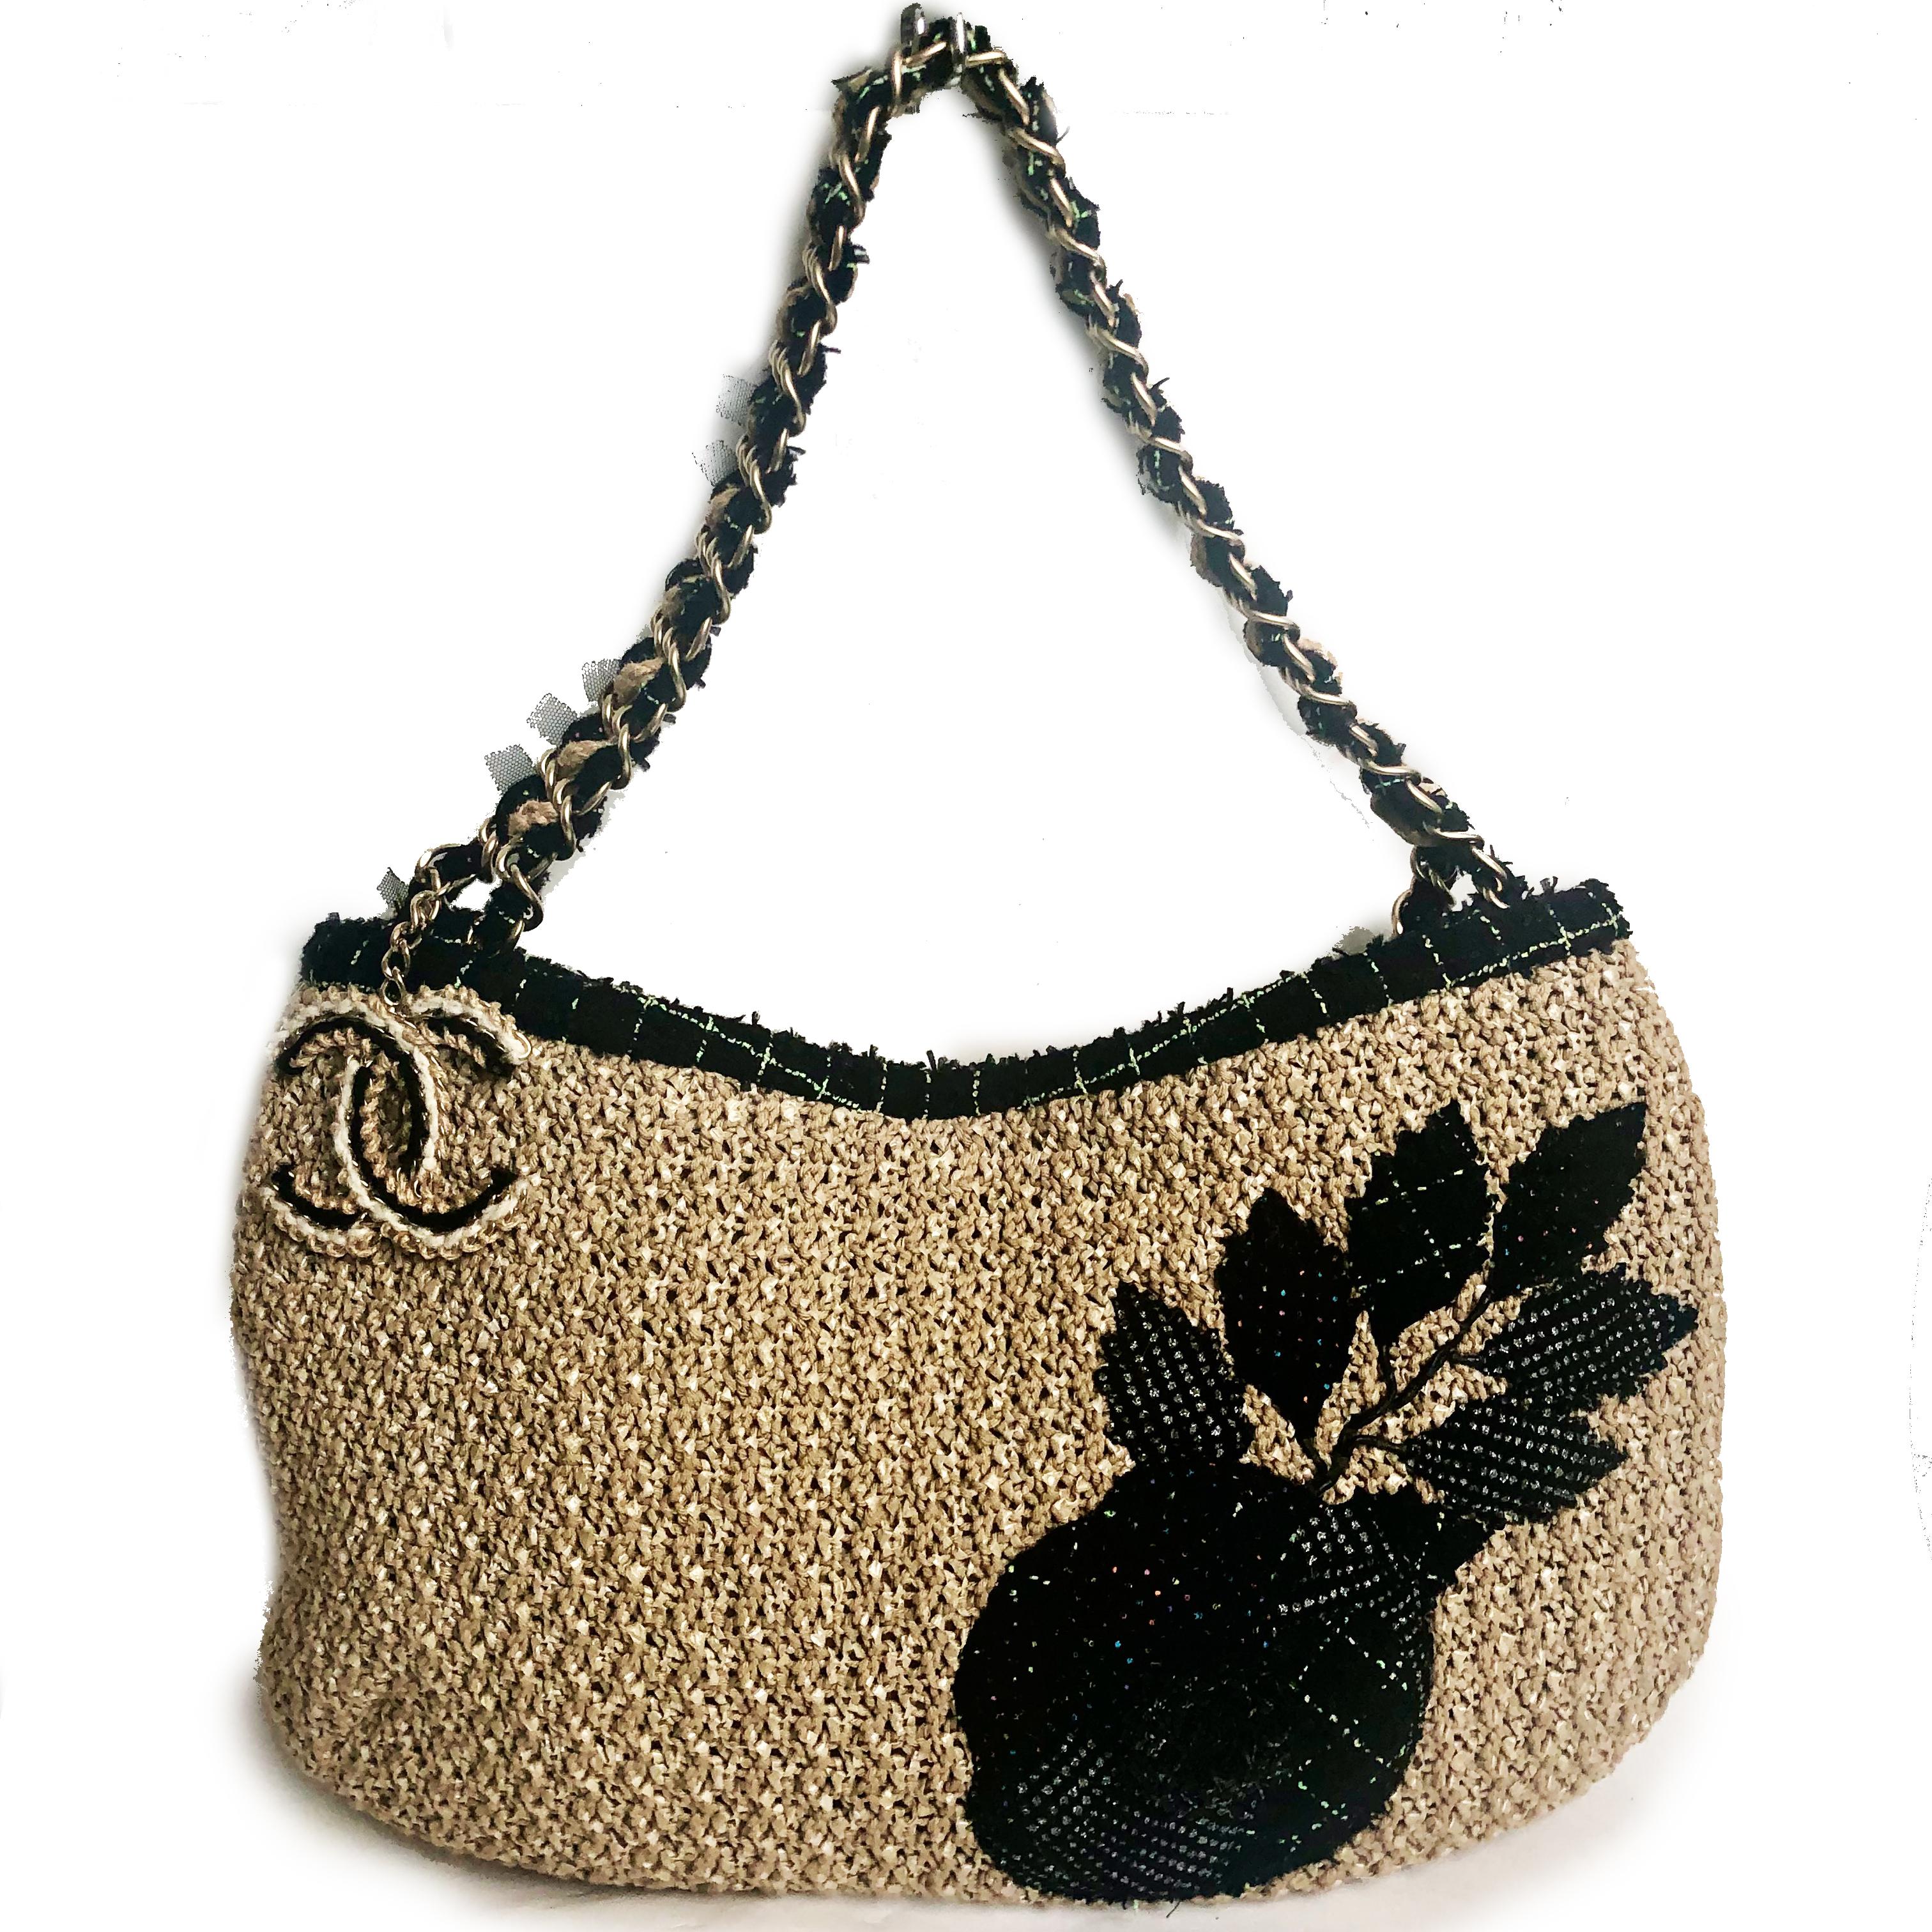 Brown Chanel Coco Country Camellia Bag Woven Straw Tote 2010 Collection 